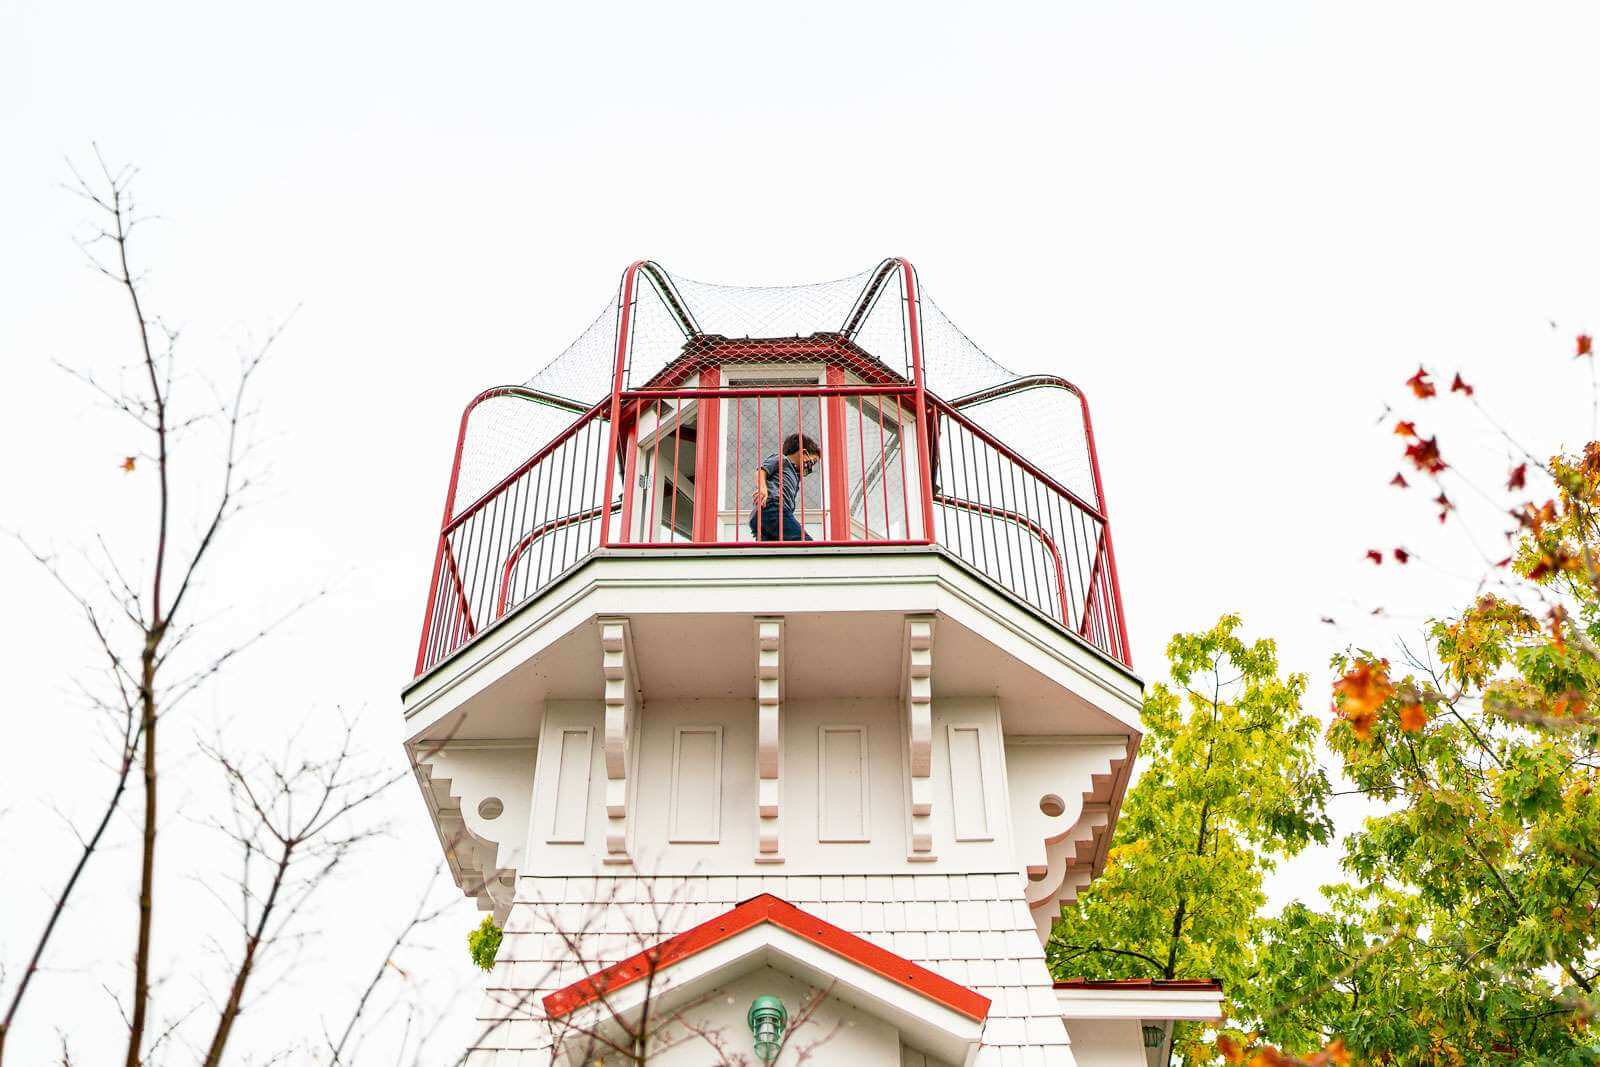 A child plays in a tower structure